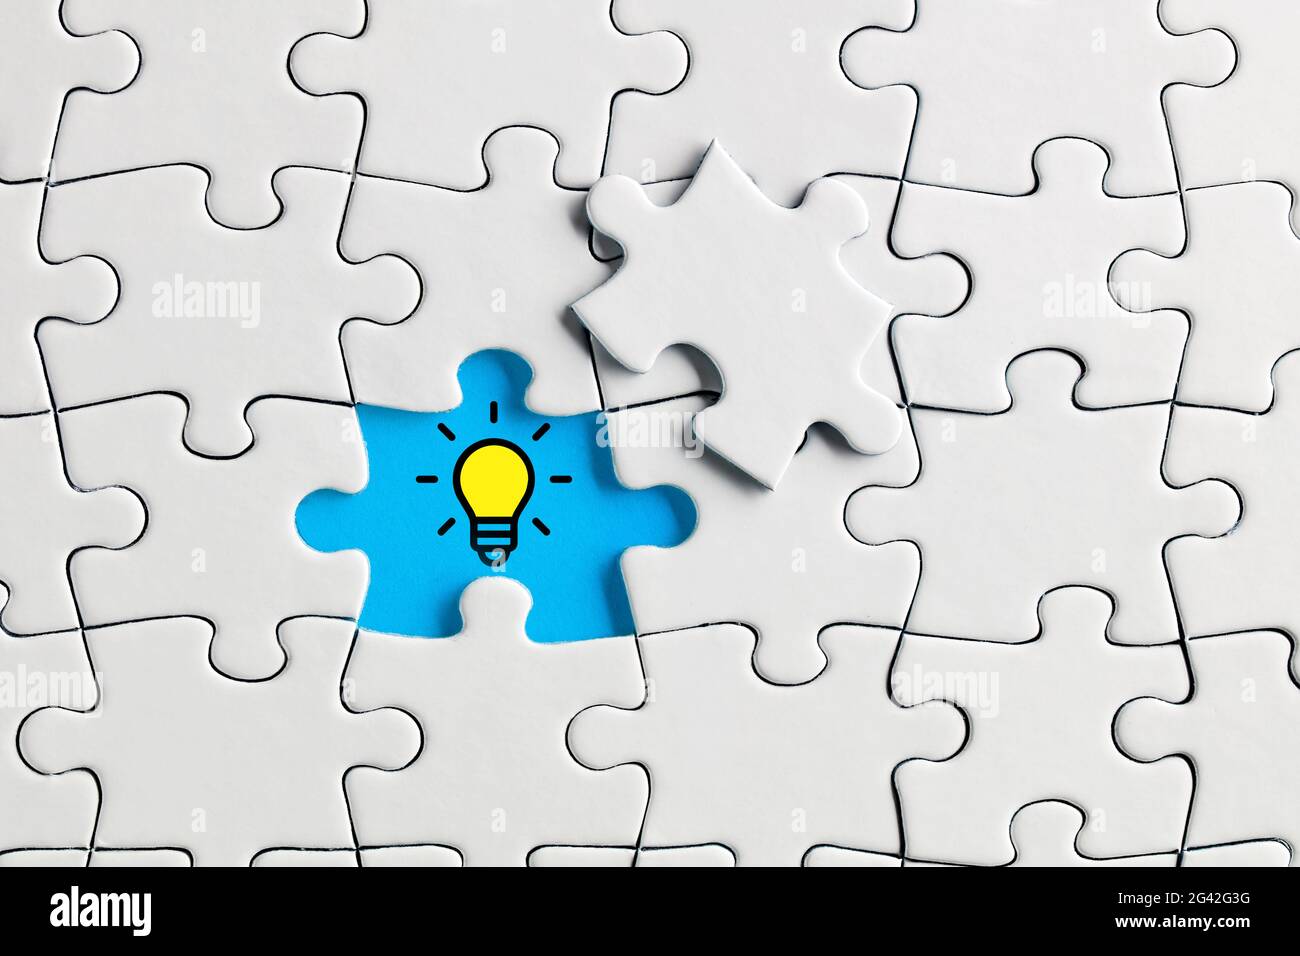 Idea or creativity light bulb icon on the missing puzzle piece. To find a  creative solution concept Stock Photo - Alamy